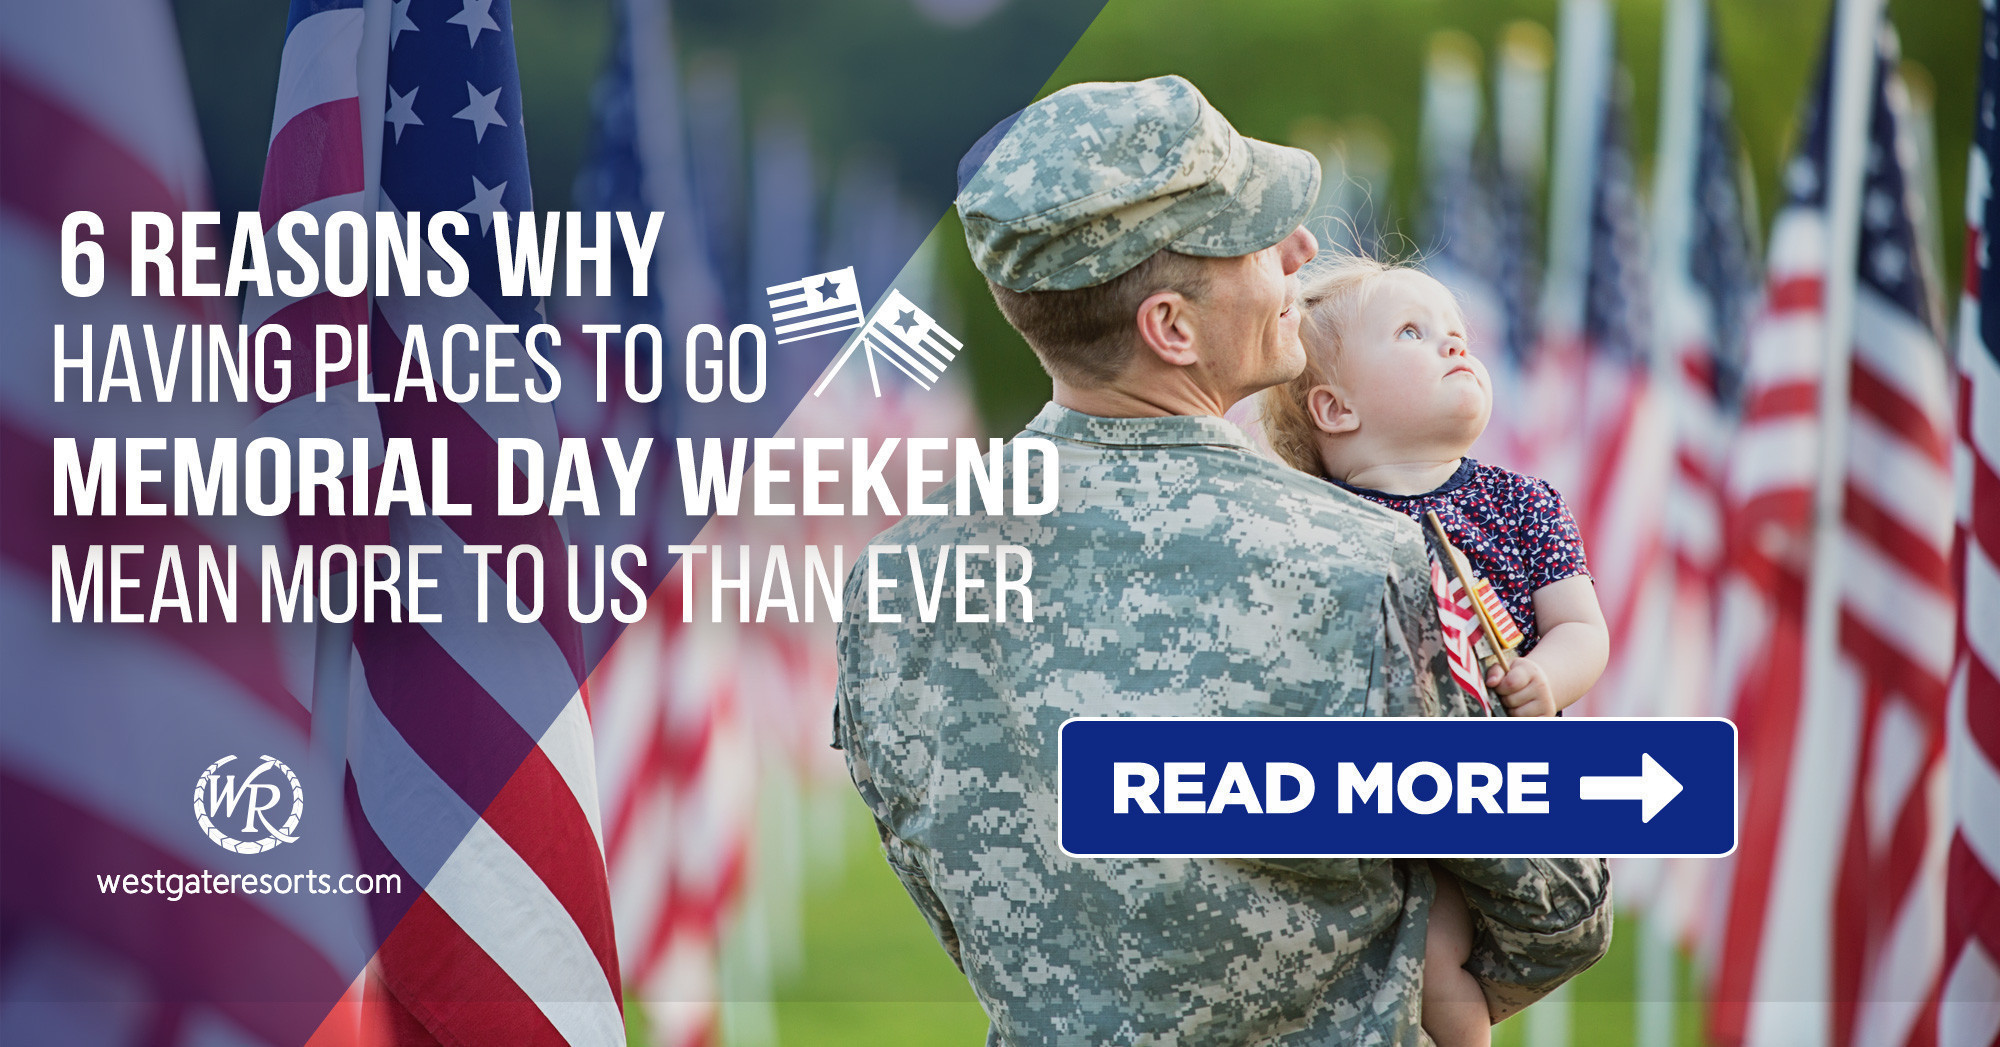 6 Reasons Why Having Places to Go Memorial Day Weekend Mean More To Us Than Ever